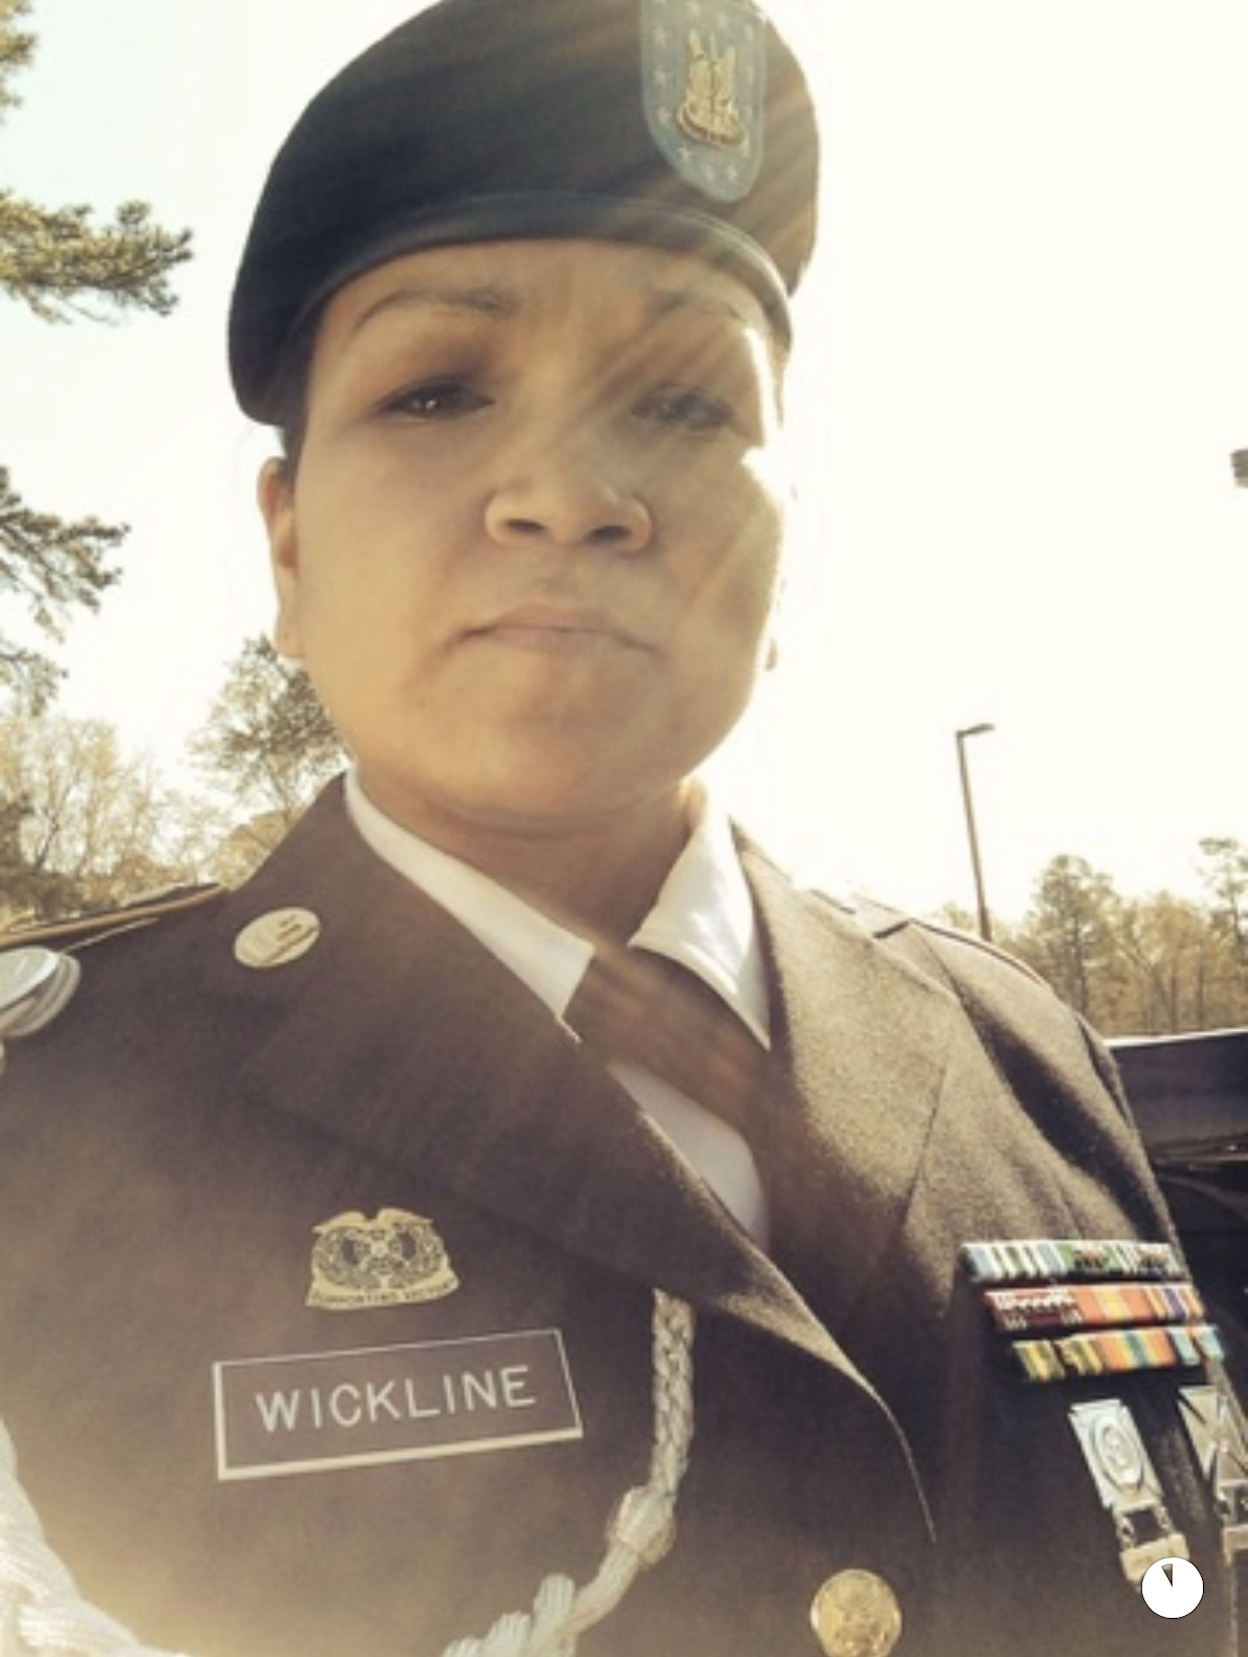 Cammie Wickline, retired U.S. Army staff sergeant and the first graduate of the Associate of Arts in Alaska Native Studies at UAA